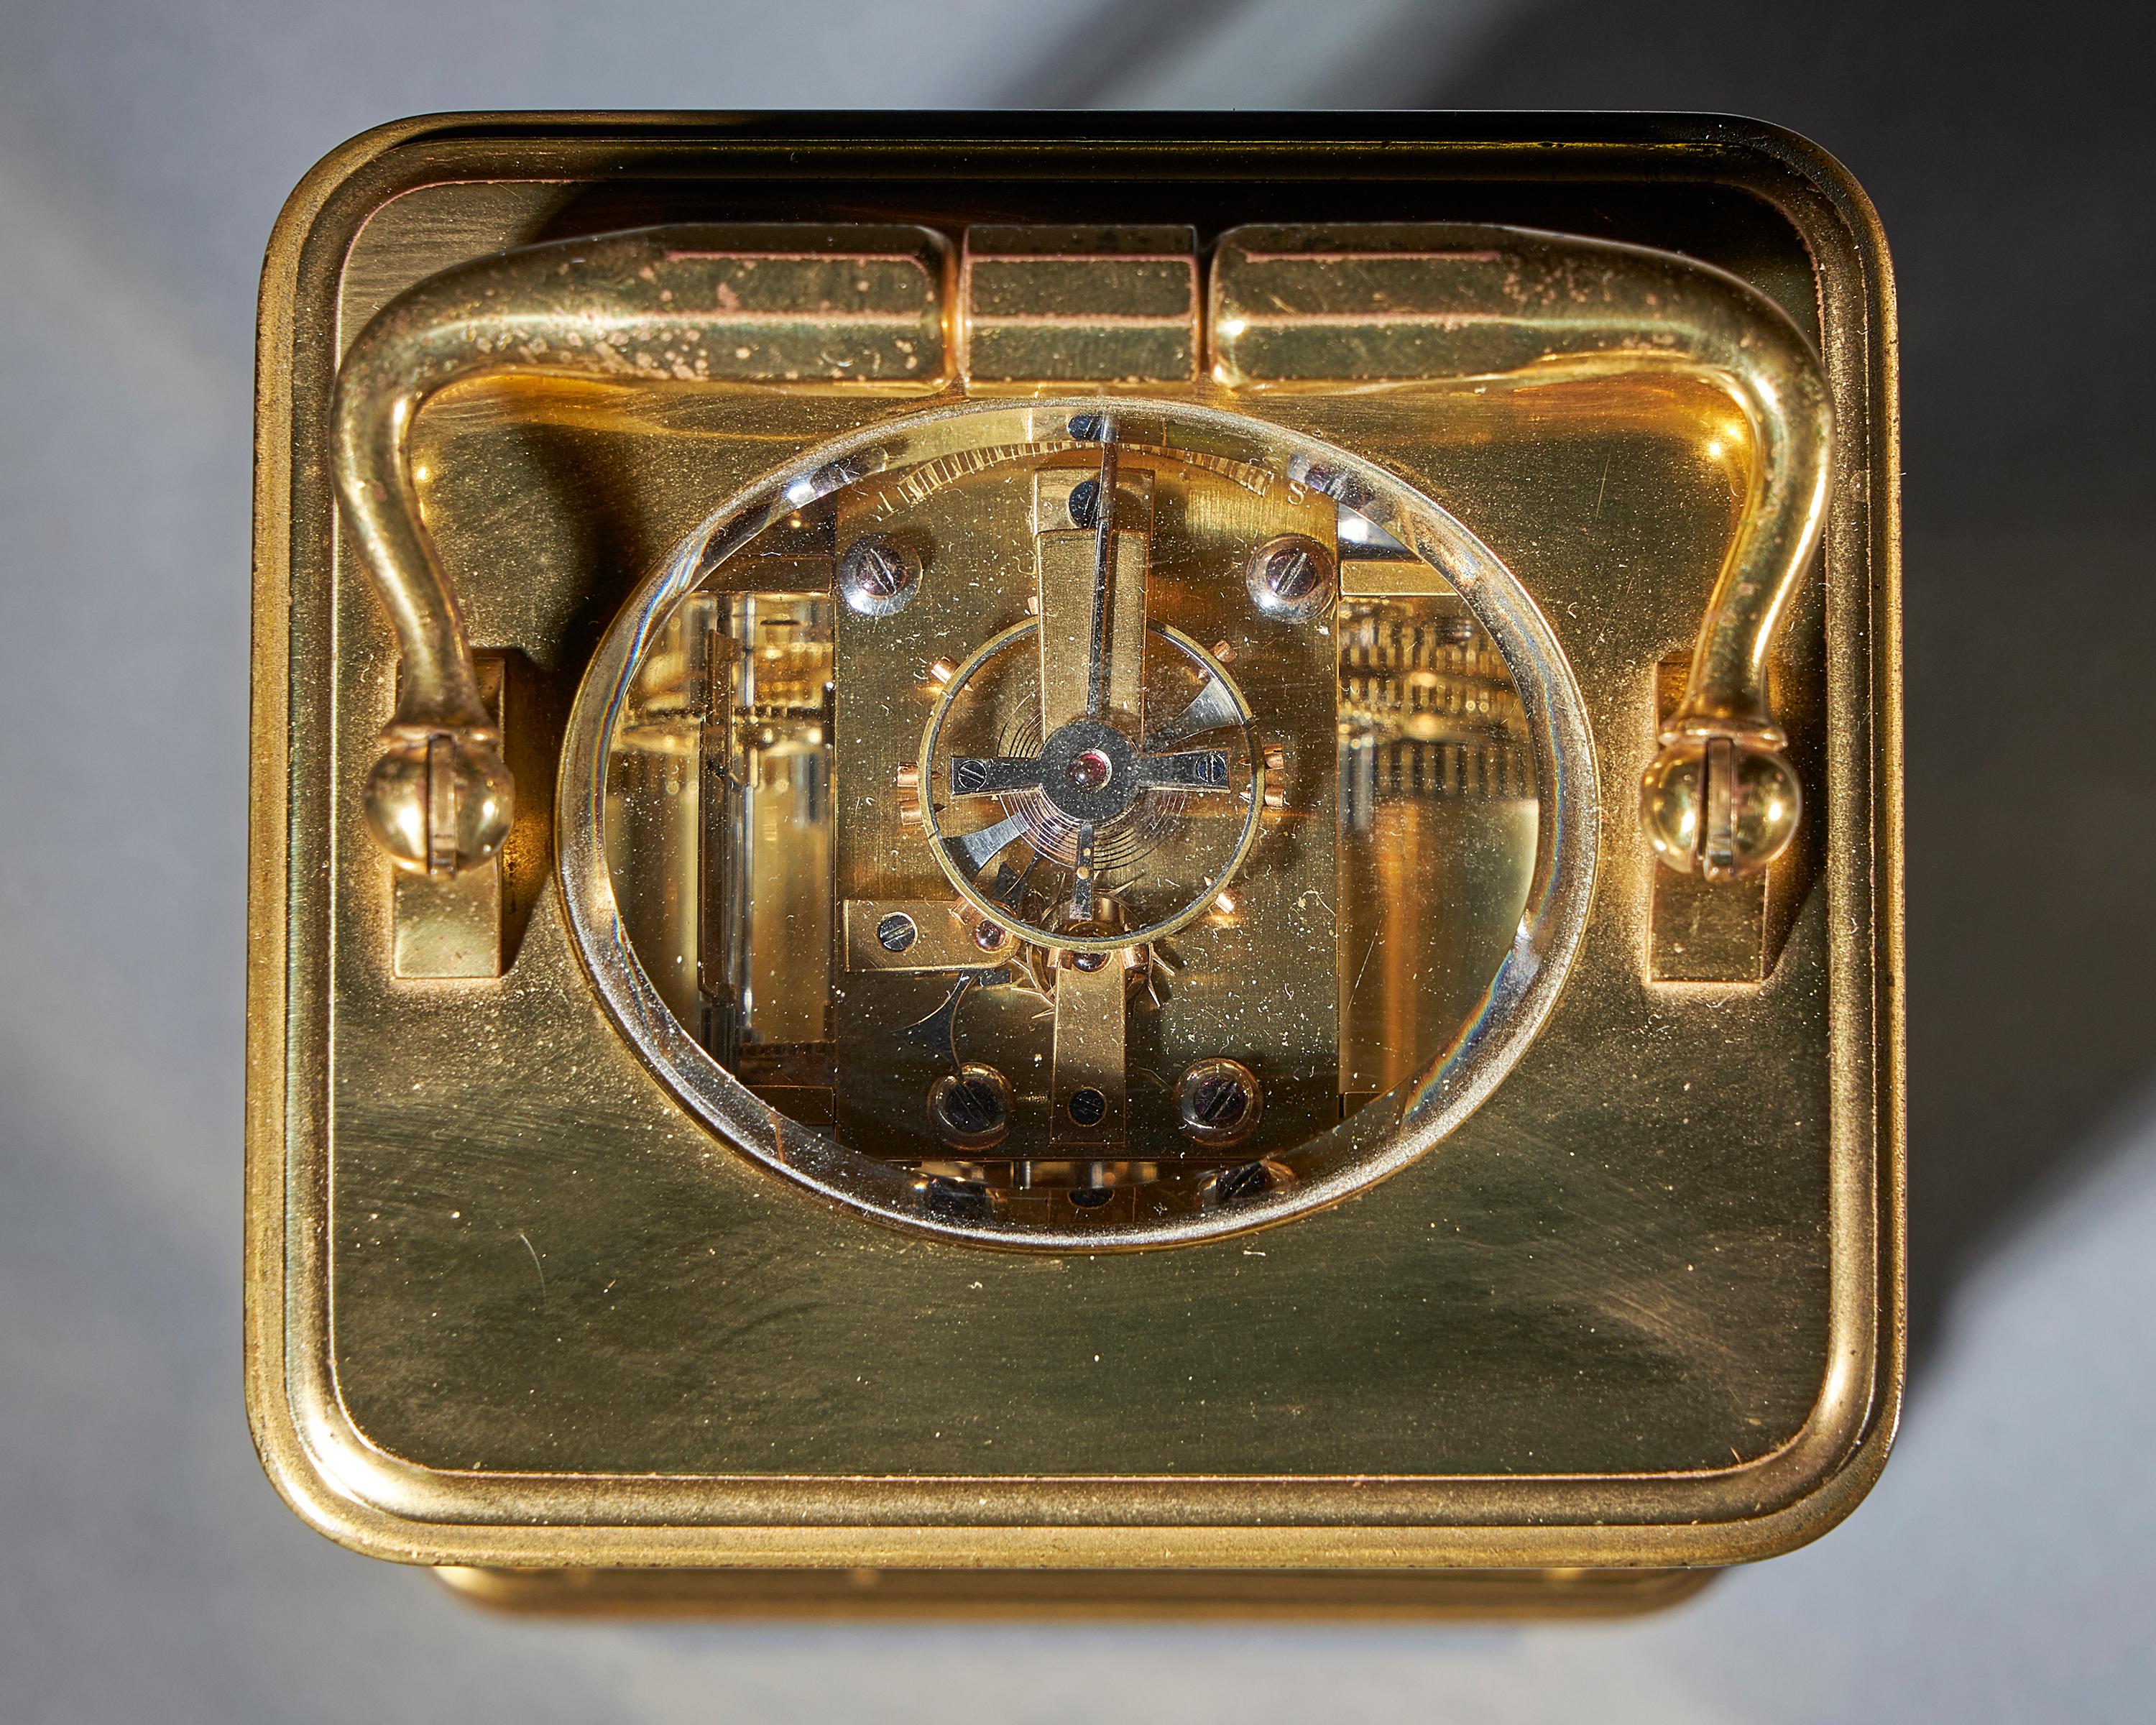 Striking 19th Century Carriage Clock with a Gilt-Brass Corniche Case by Grohé In Good Condition For Sale In Oxfordshire, United Kingdom